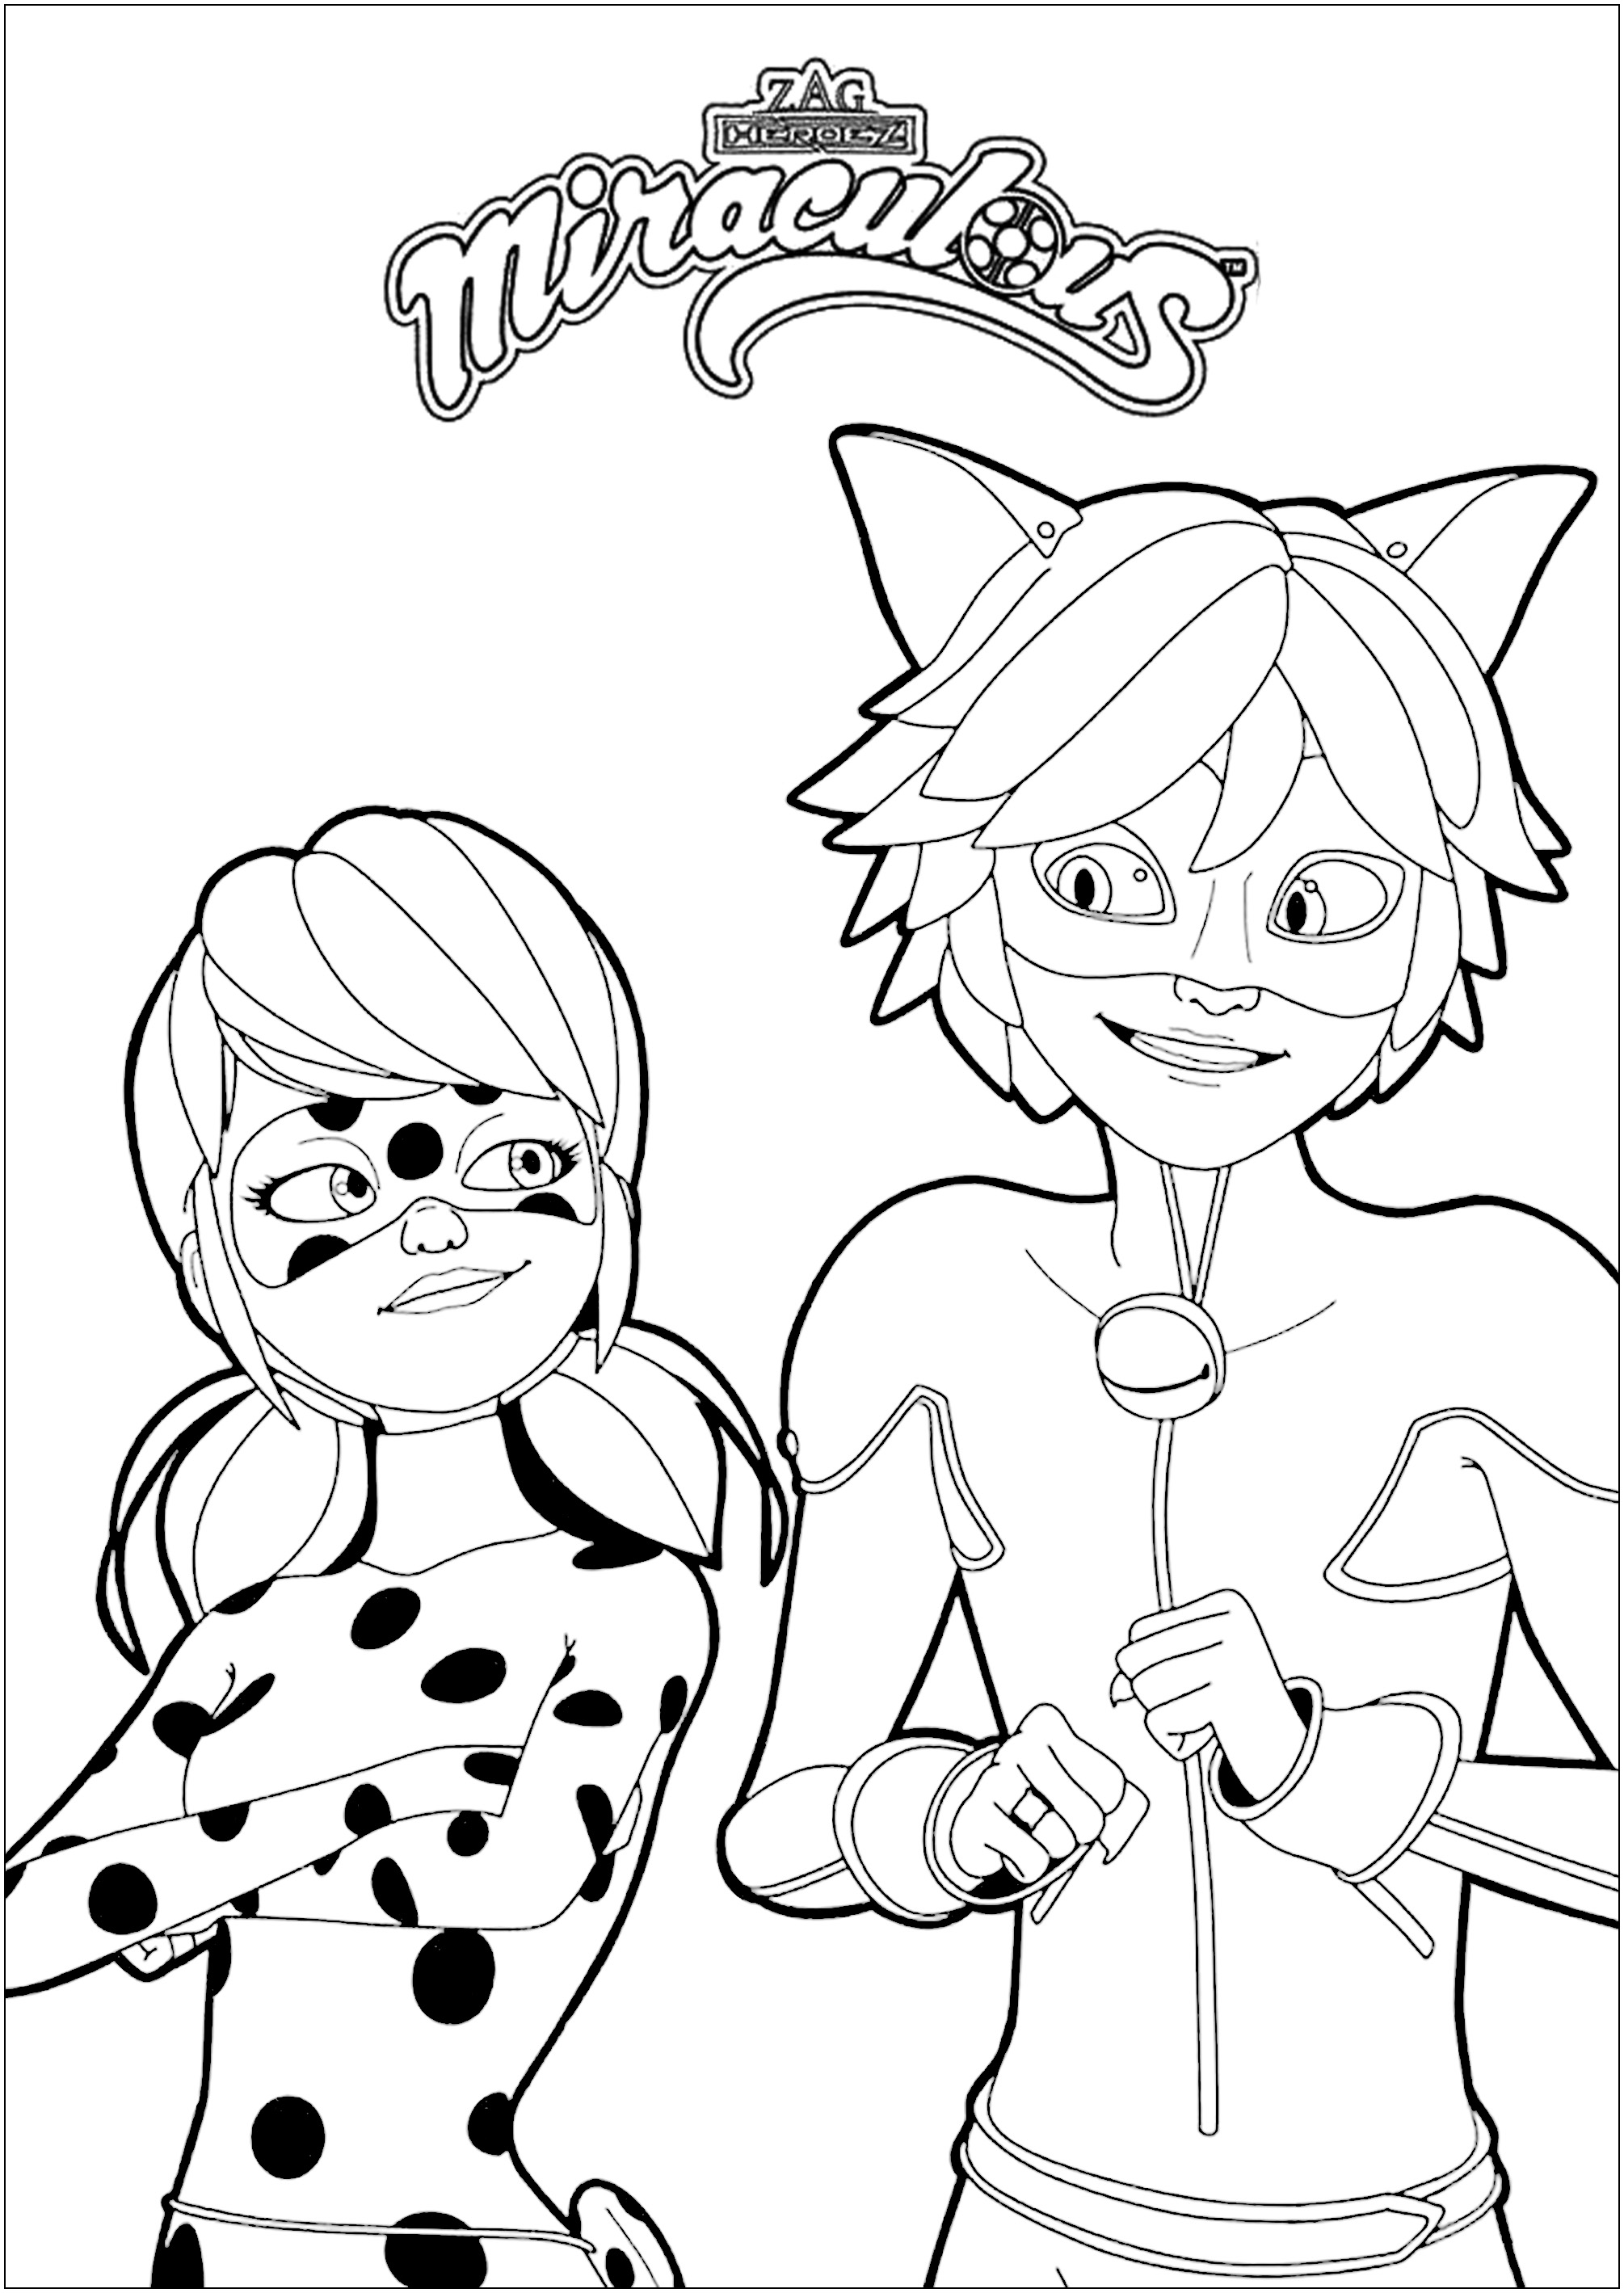 Download Miraculous lady bug to color for kids - Miraculous ...